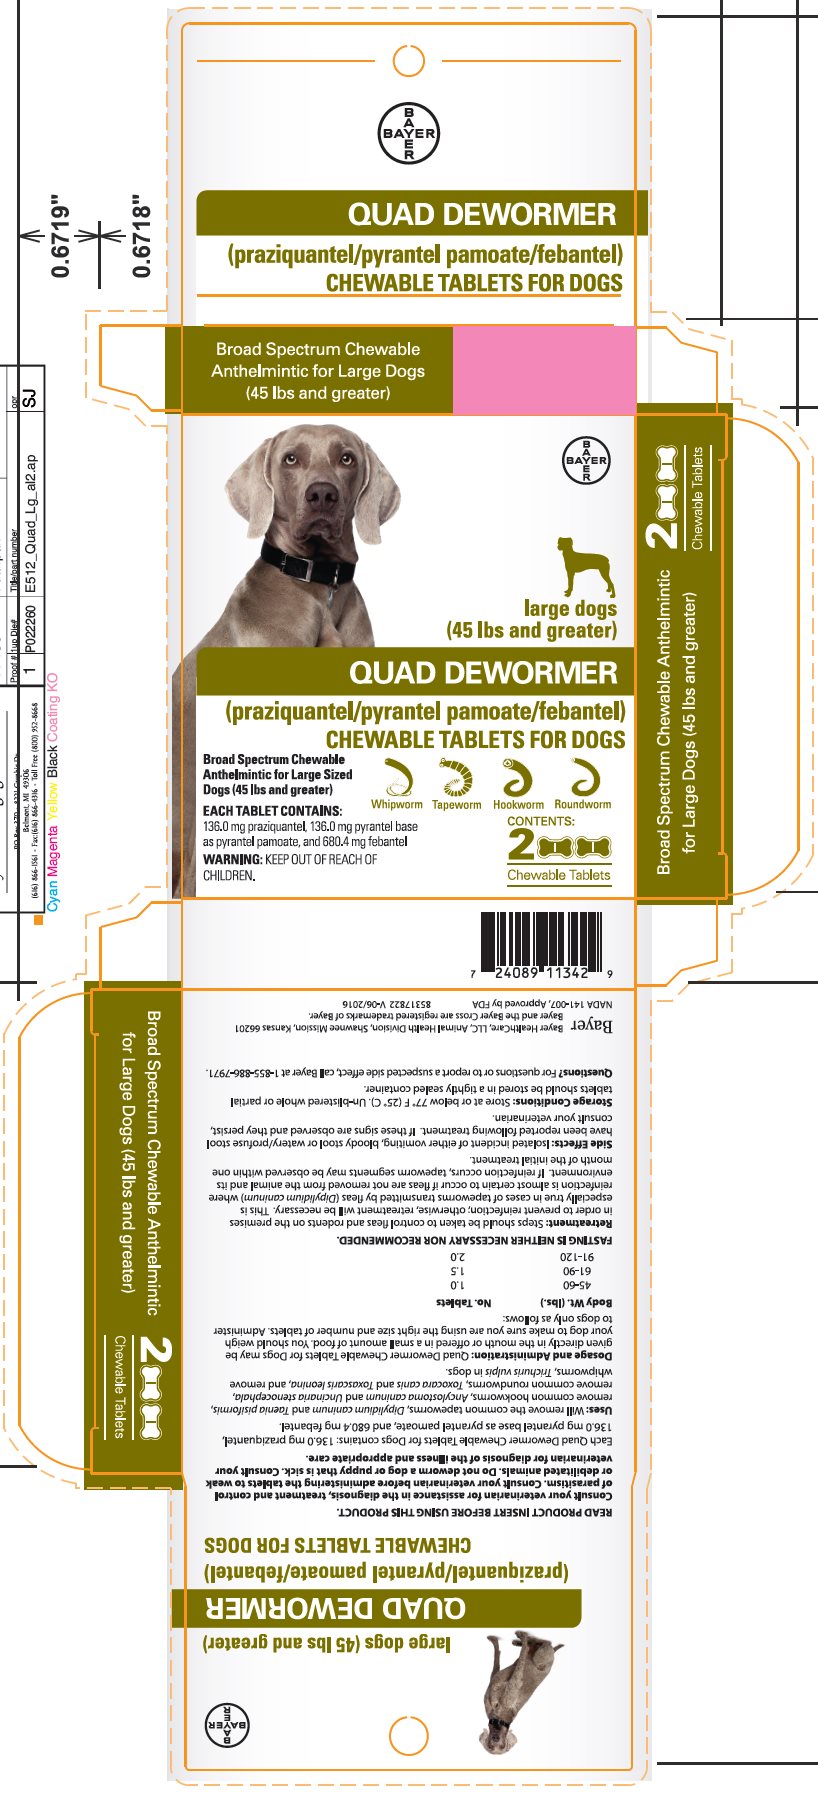 Quad Dewormer (praziquantel/pyrantel pamoate/febantel) Chewable Tablets for Dogs label - large dogs (45 lbs and greater)